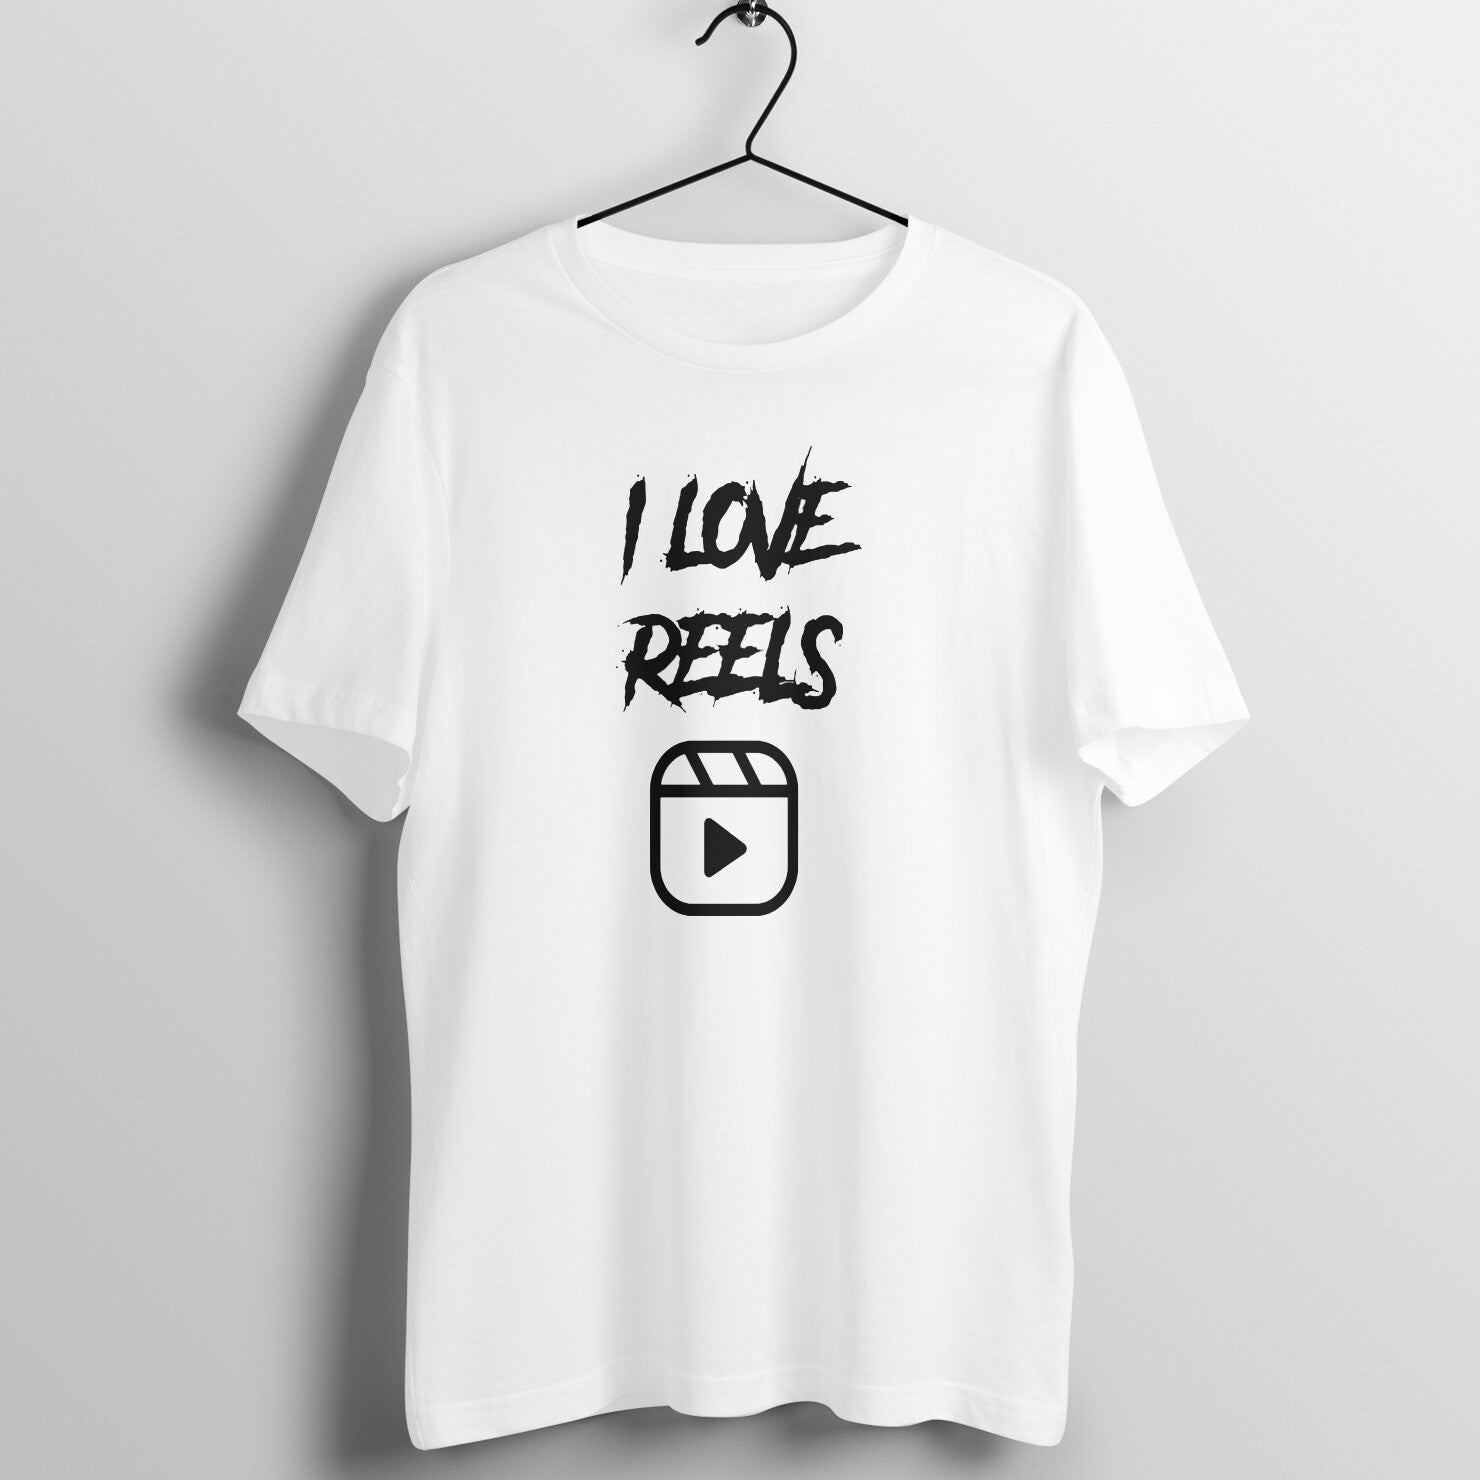 I Love Reels Exclusive White T Shirt for Men and Women